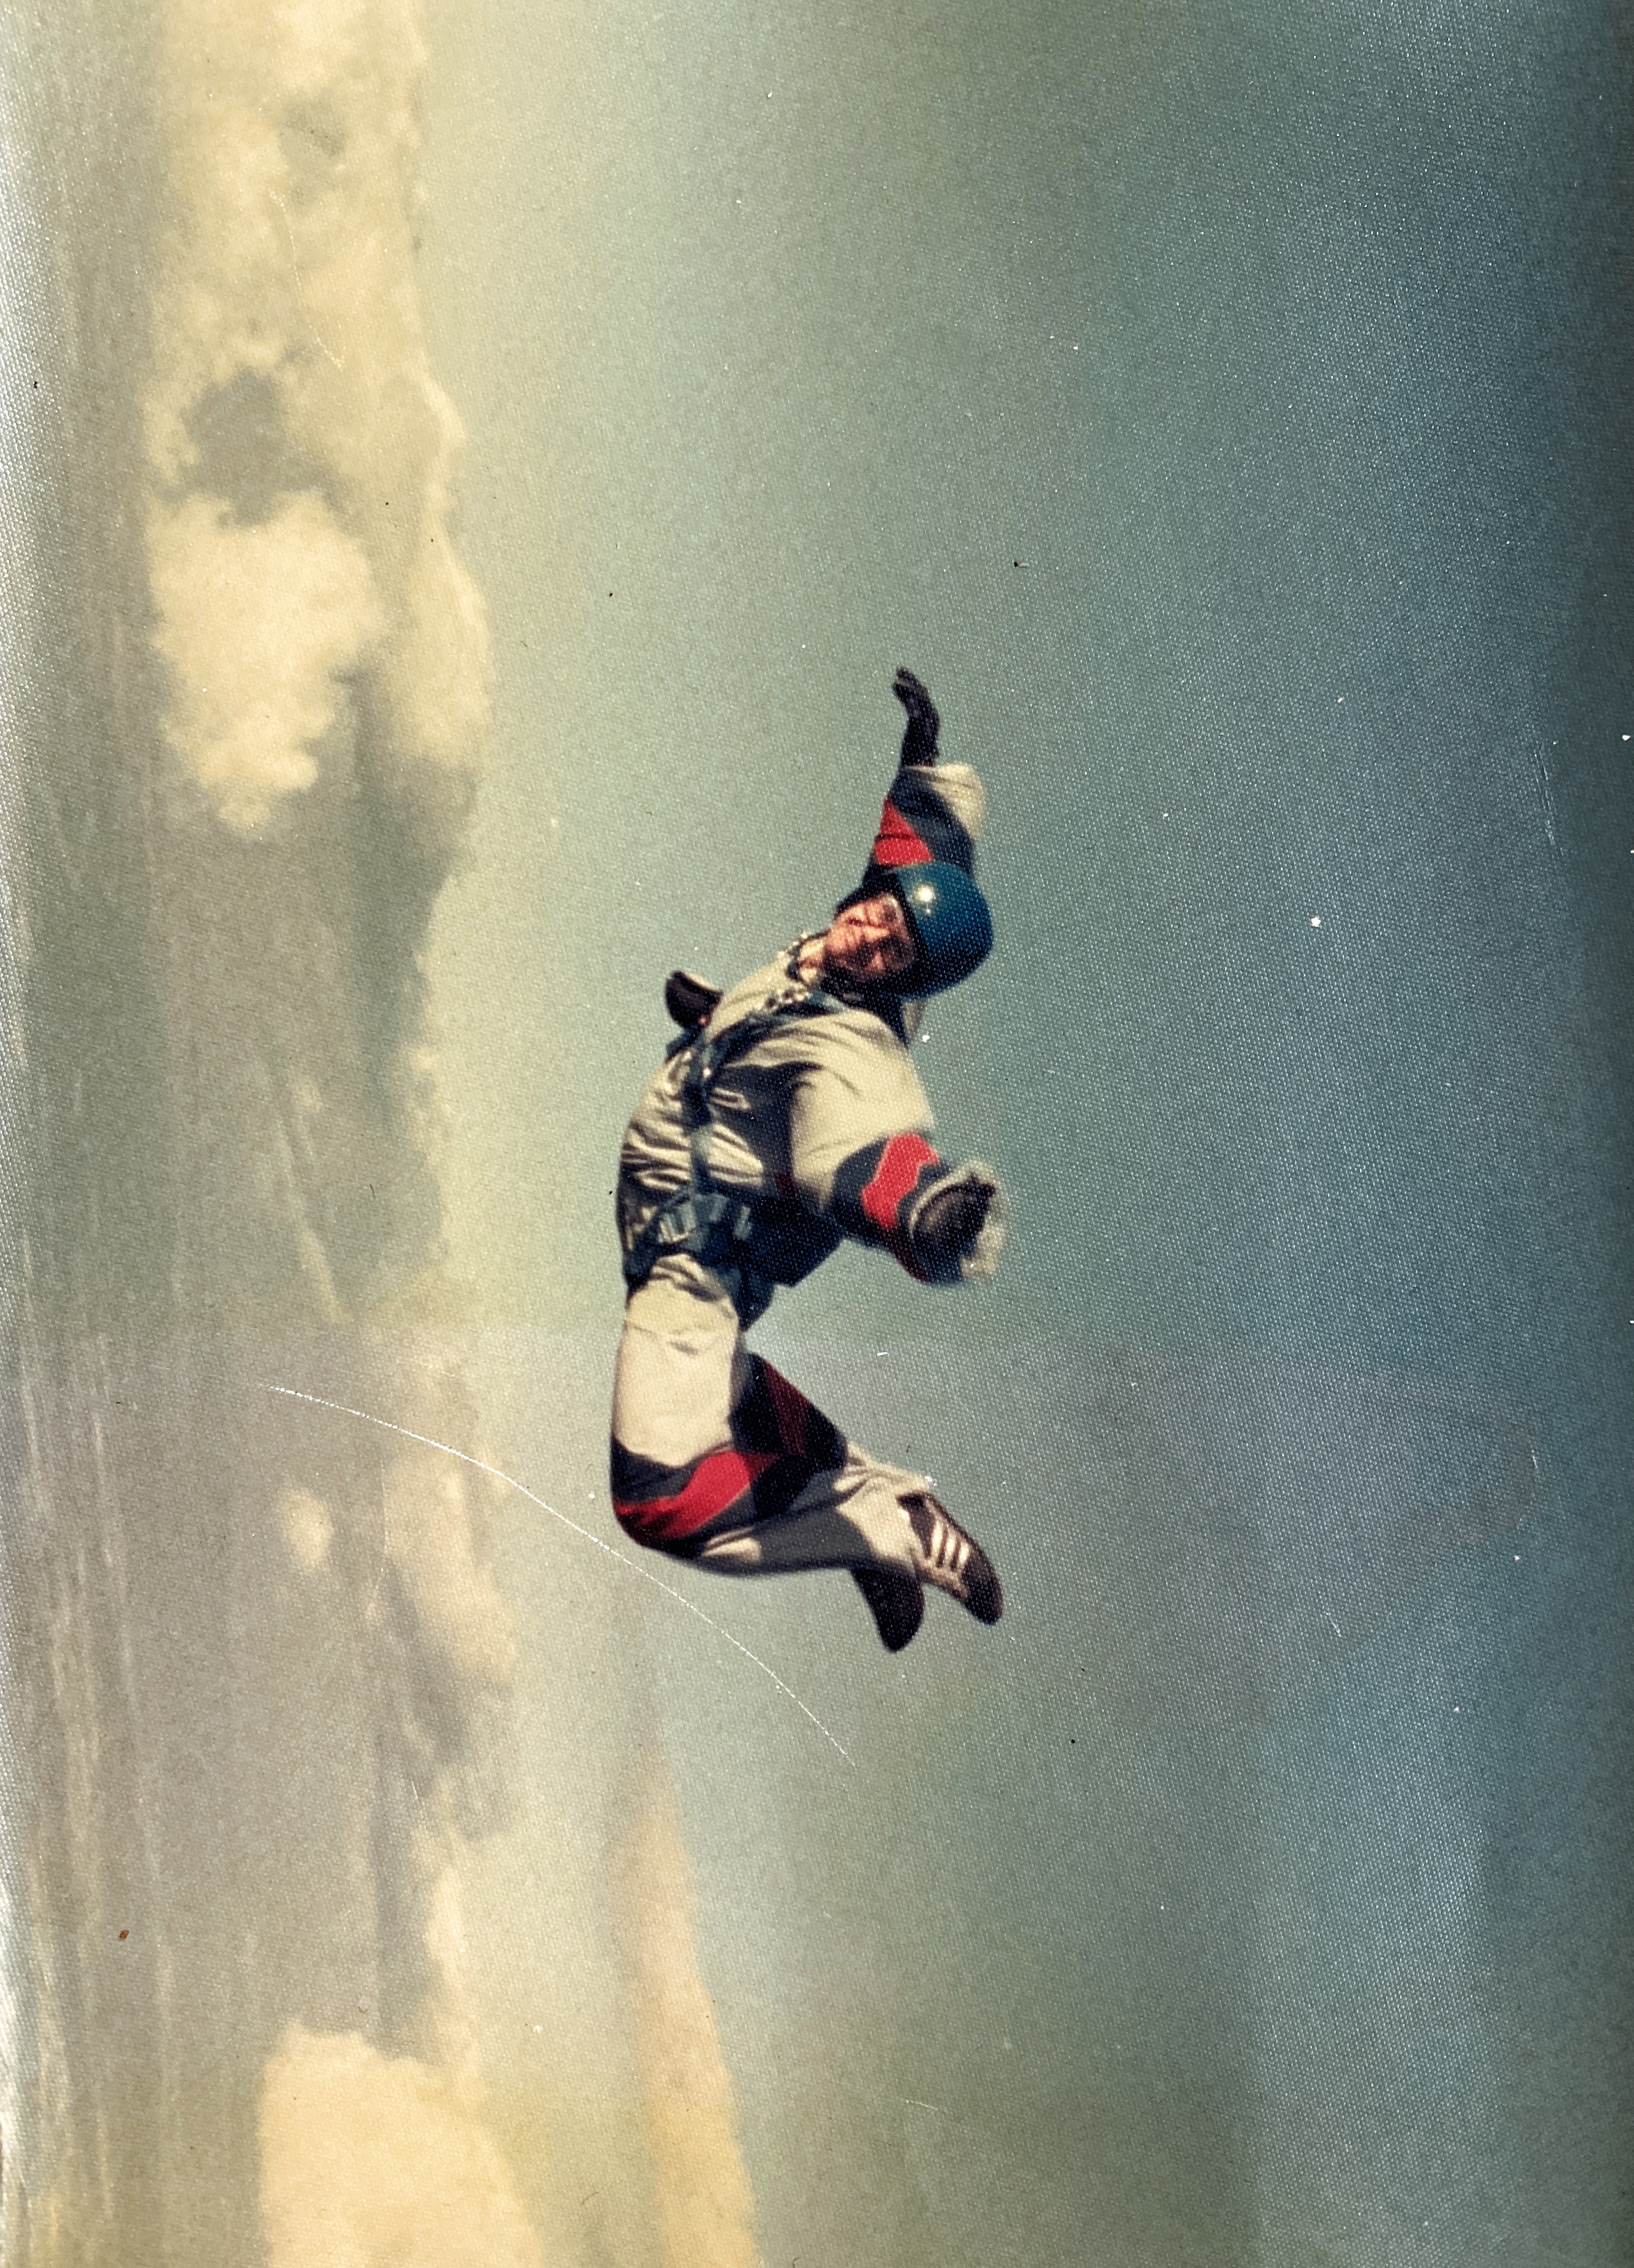 One of my first photos in freefall circa 1980